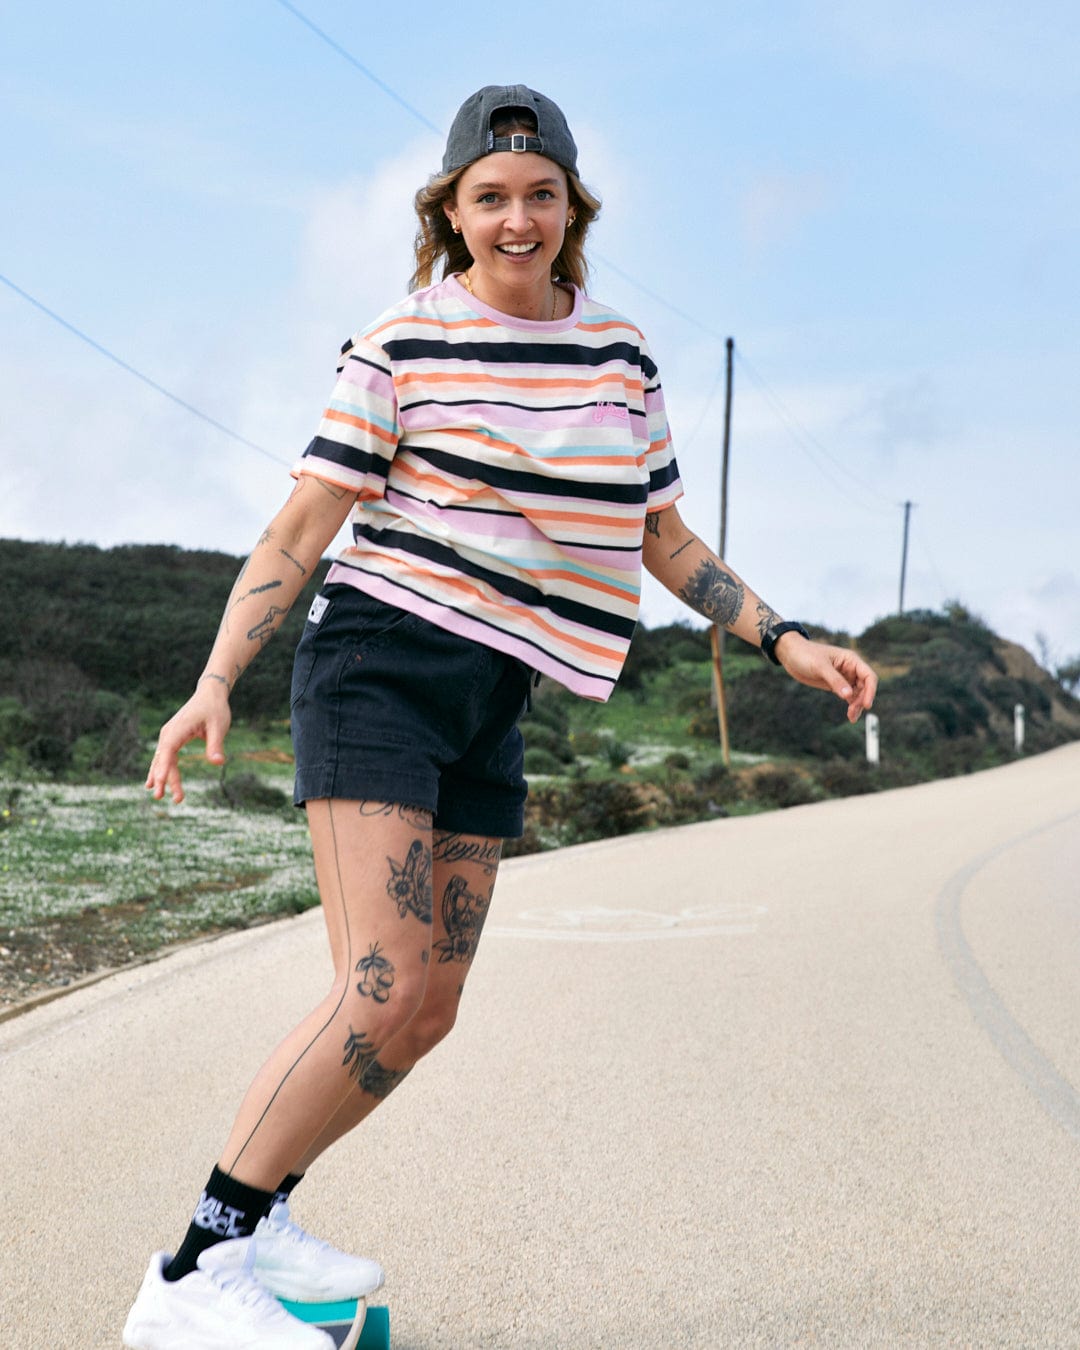 A young woman in a Saltrock dark grey striped Palm Cap and shorts skating on a road, smiling, with tattoos visible on her legs and arms.